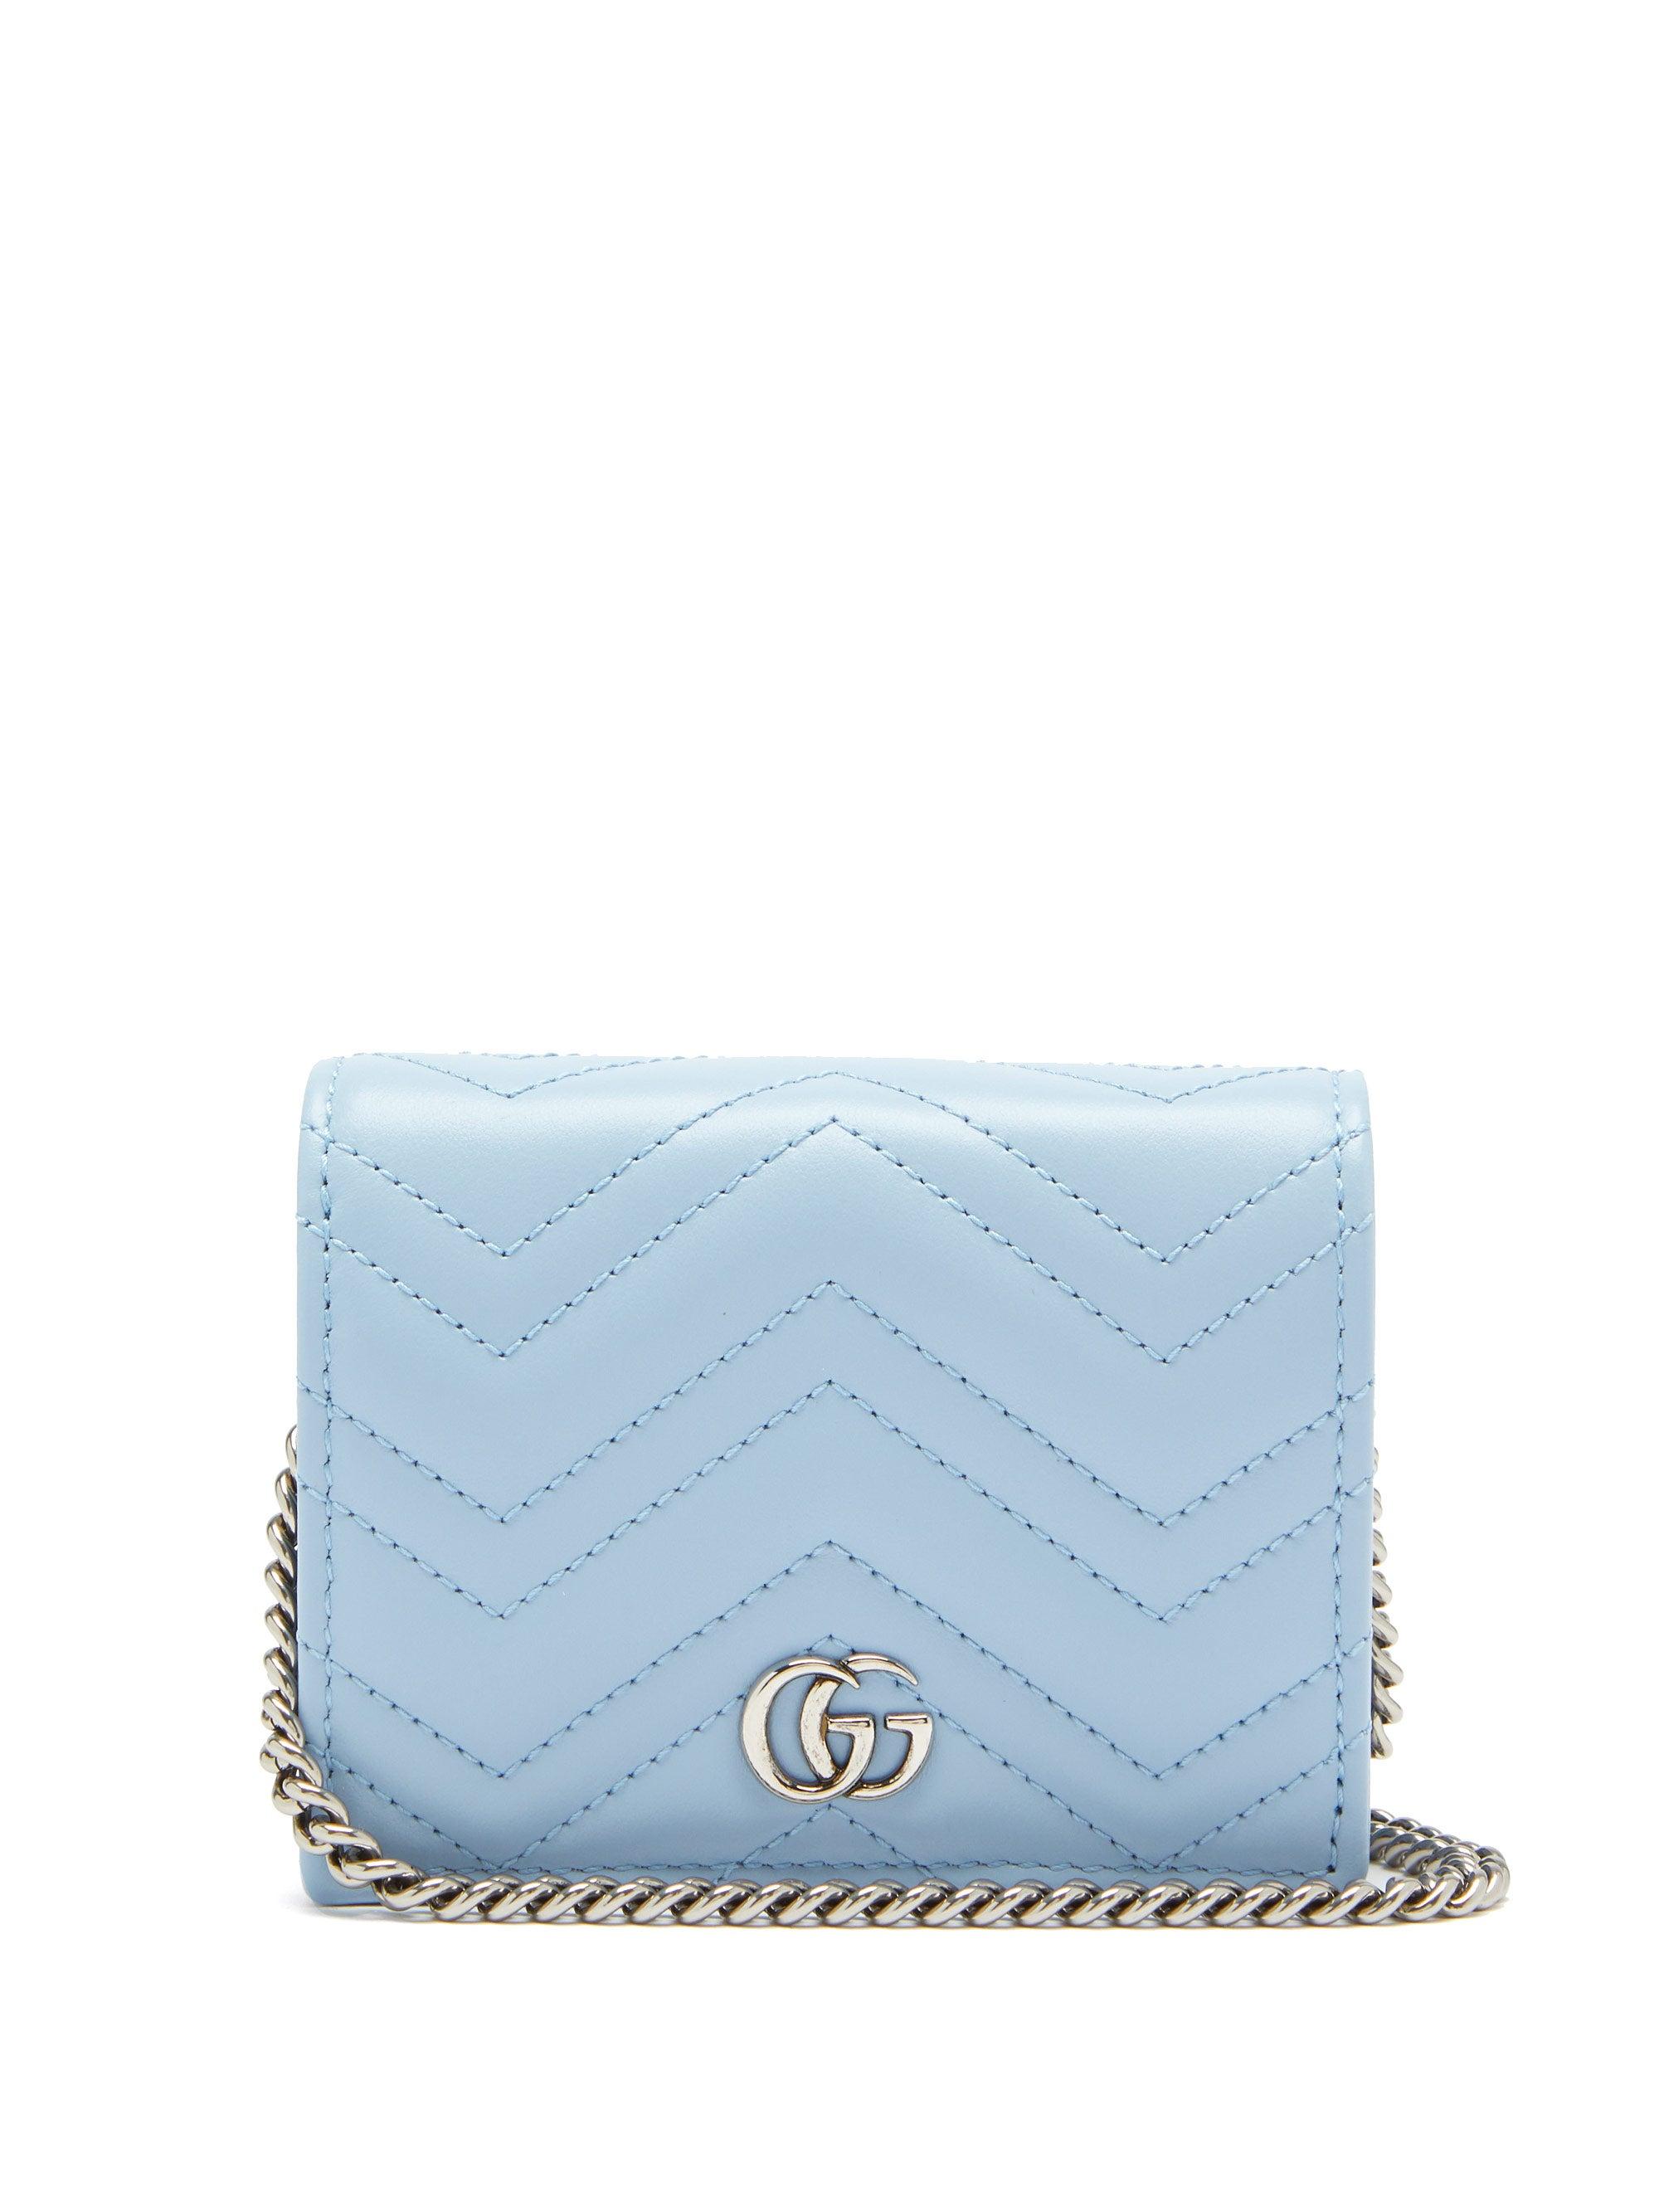 Gucci Marmont Zip Around Wallet GG (12 Card Slot) Pastel Blue in Matelasse  Calfskin Leather with Palladium-tone - US